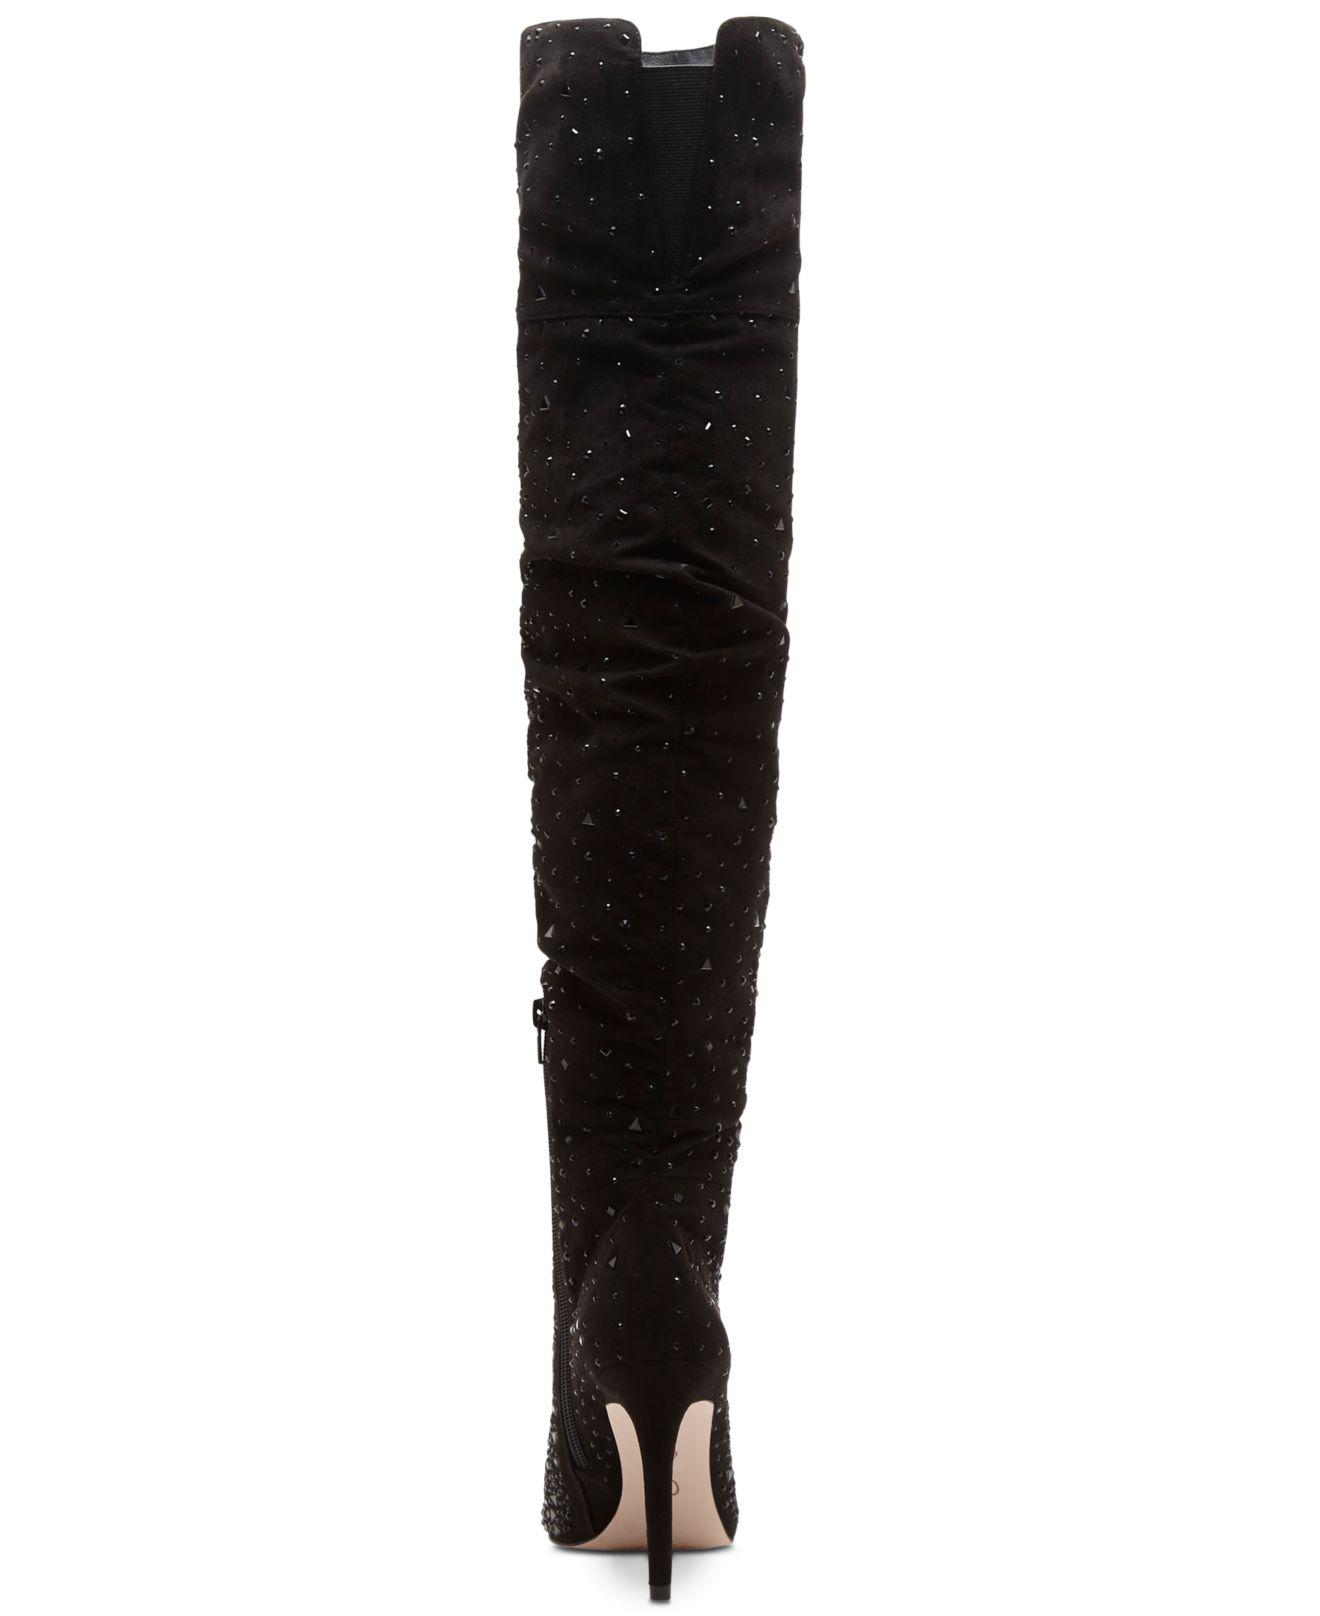 luxella over the knee boot